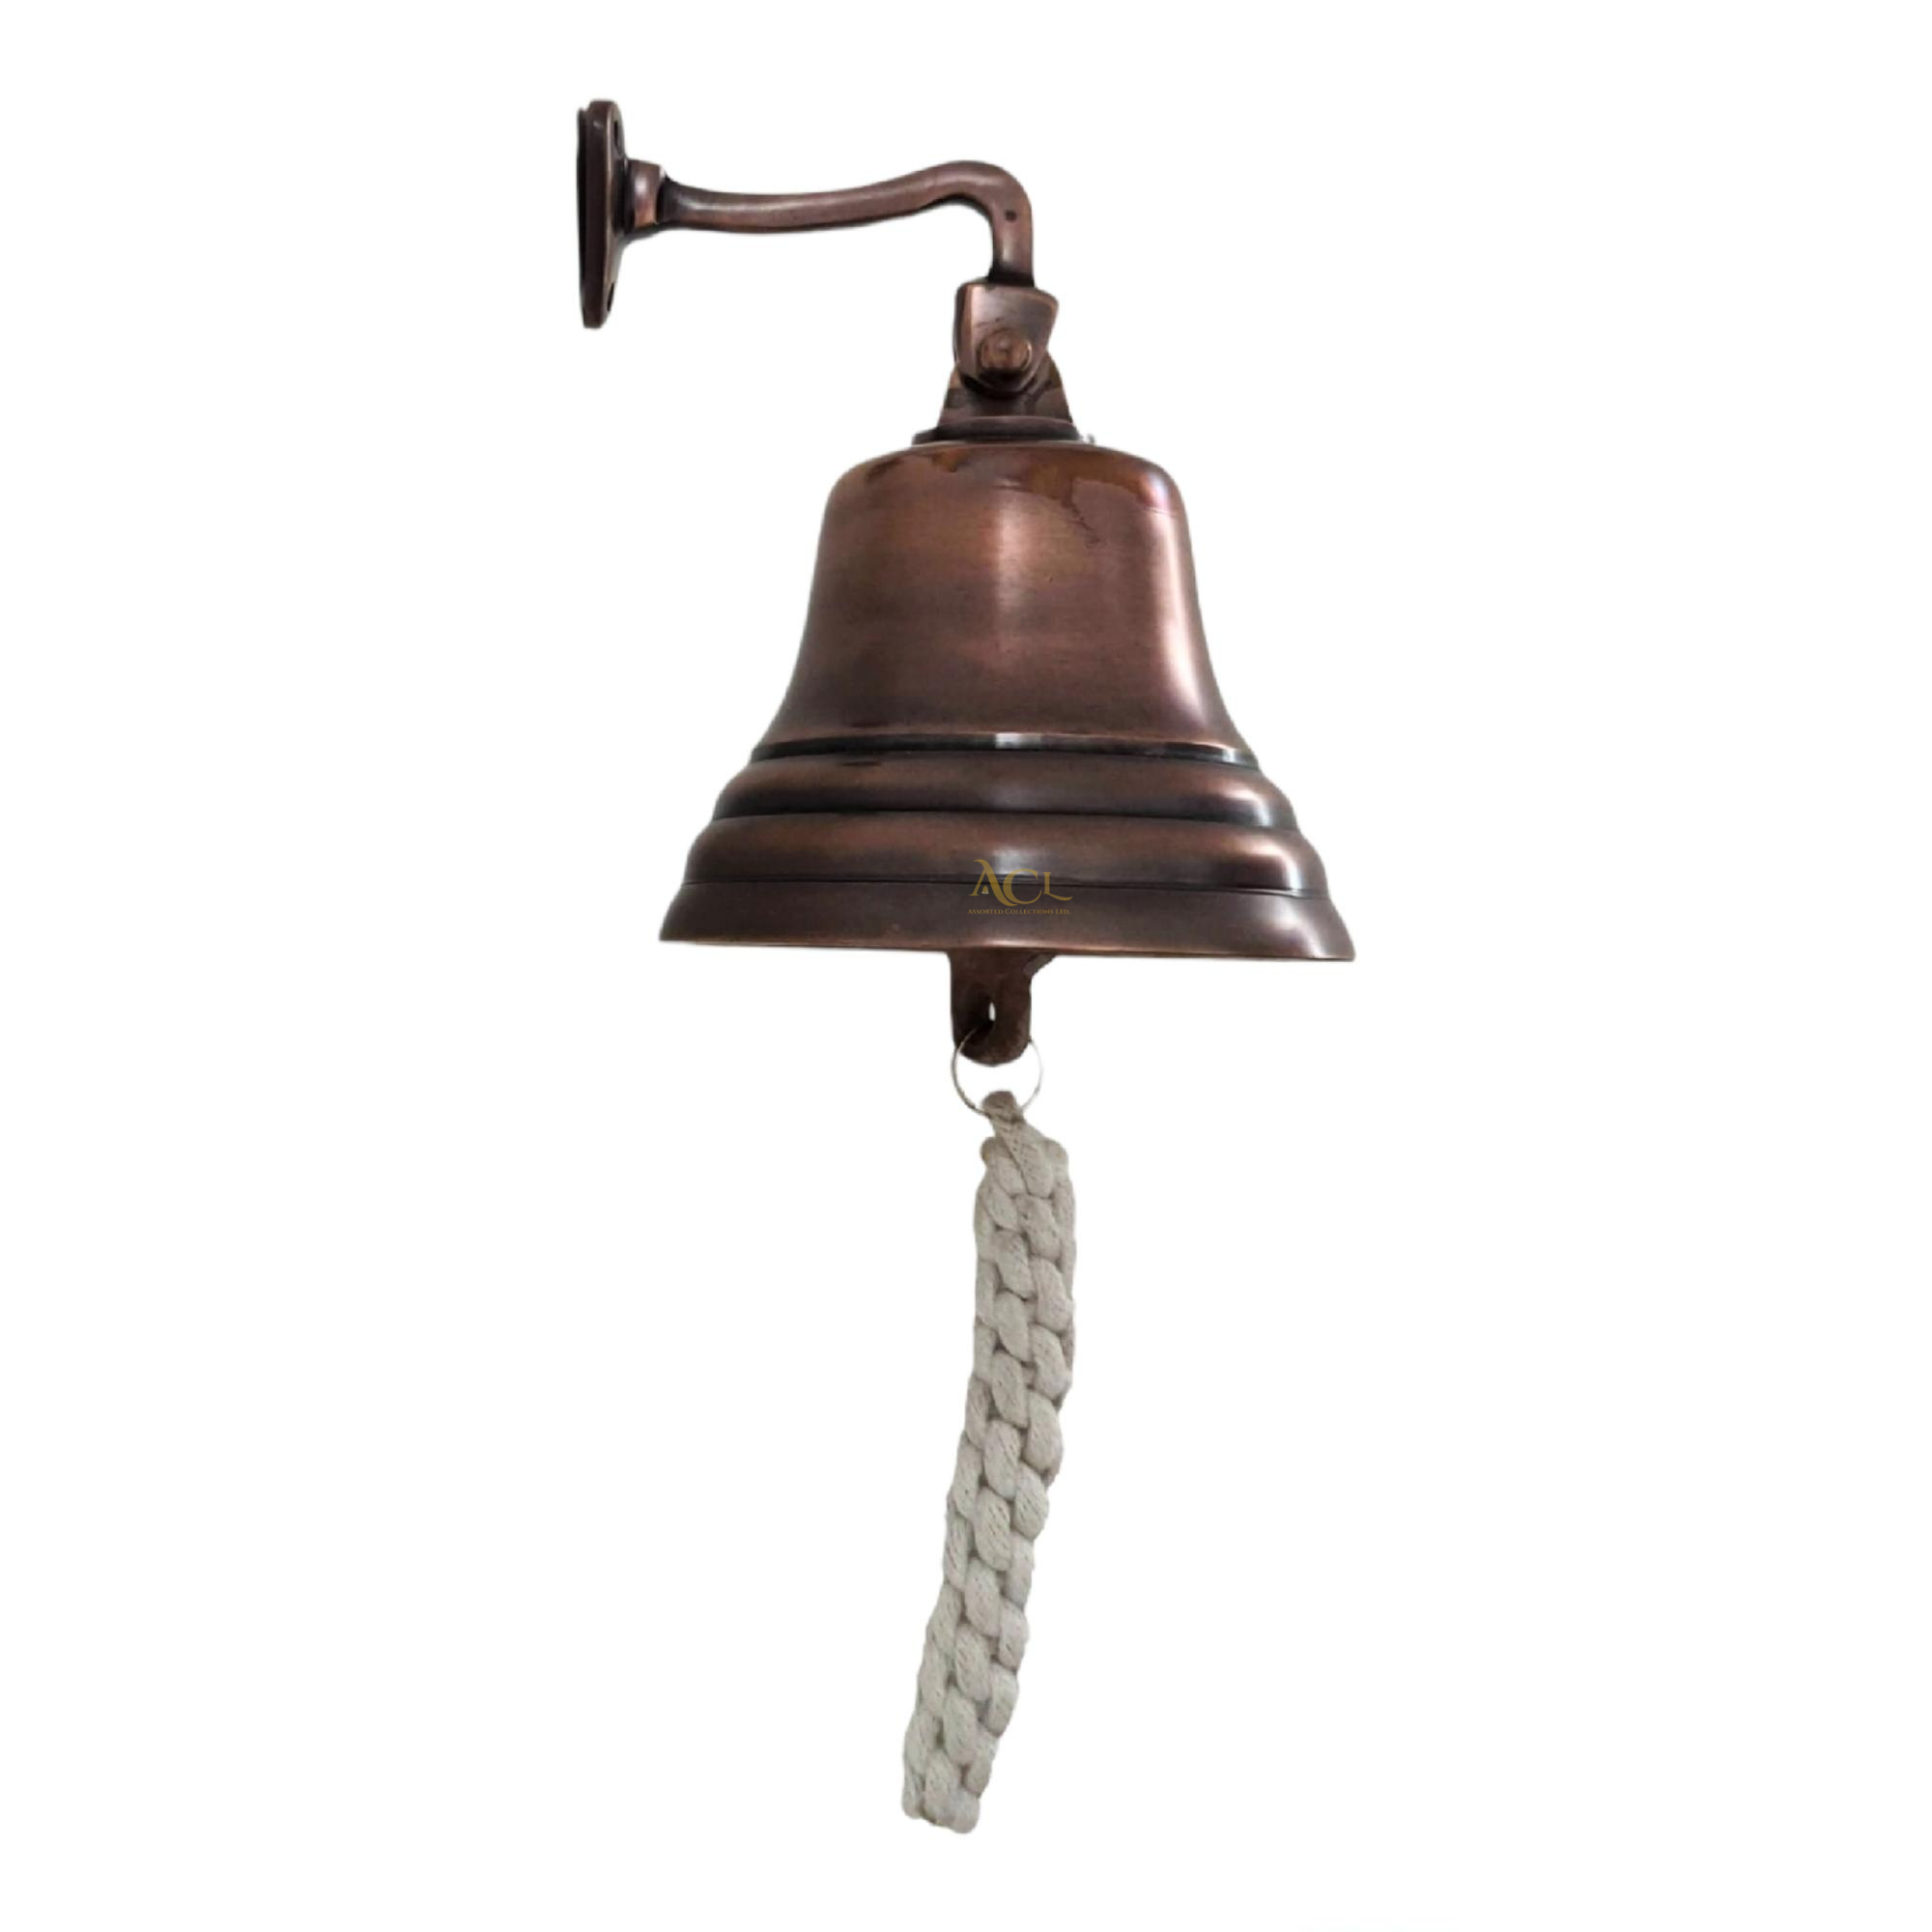 4 Solid Antique Brass Bell Quality Marine Wall Mounted Ship Hanging Bell  Perfect for Dinner, Indoor, Outdoor, School, Bar, Reception, Last Order 